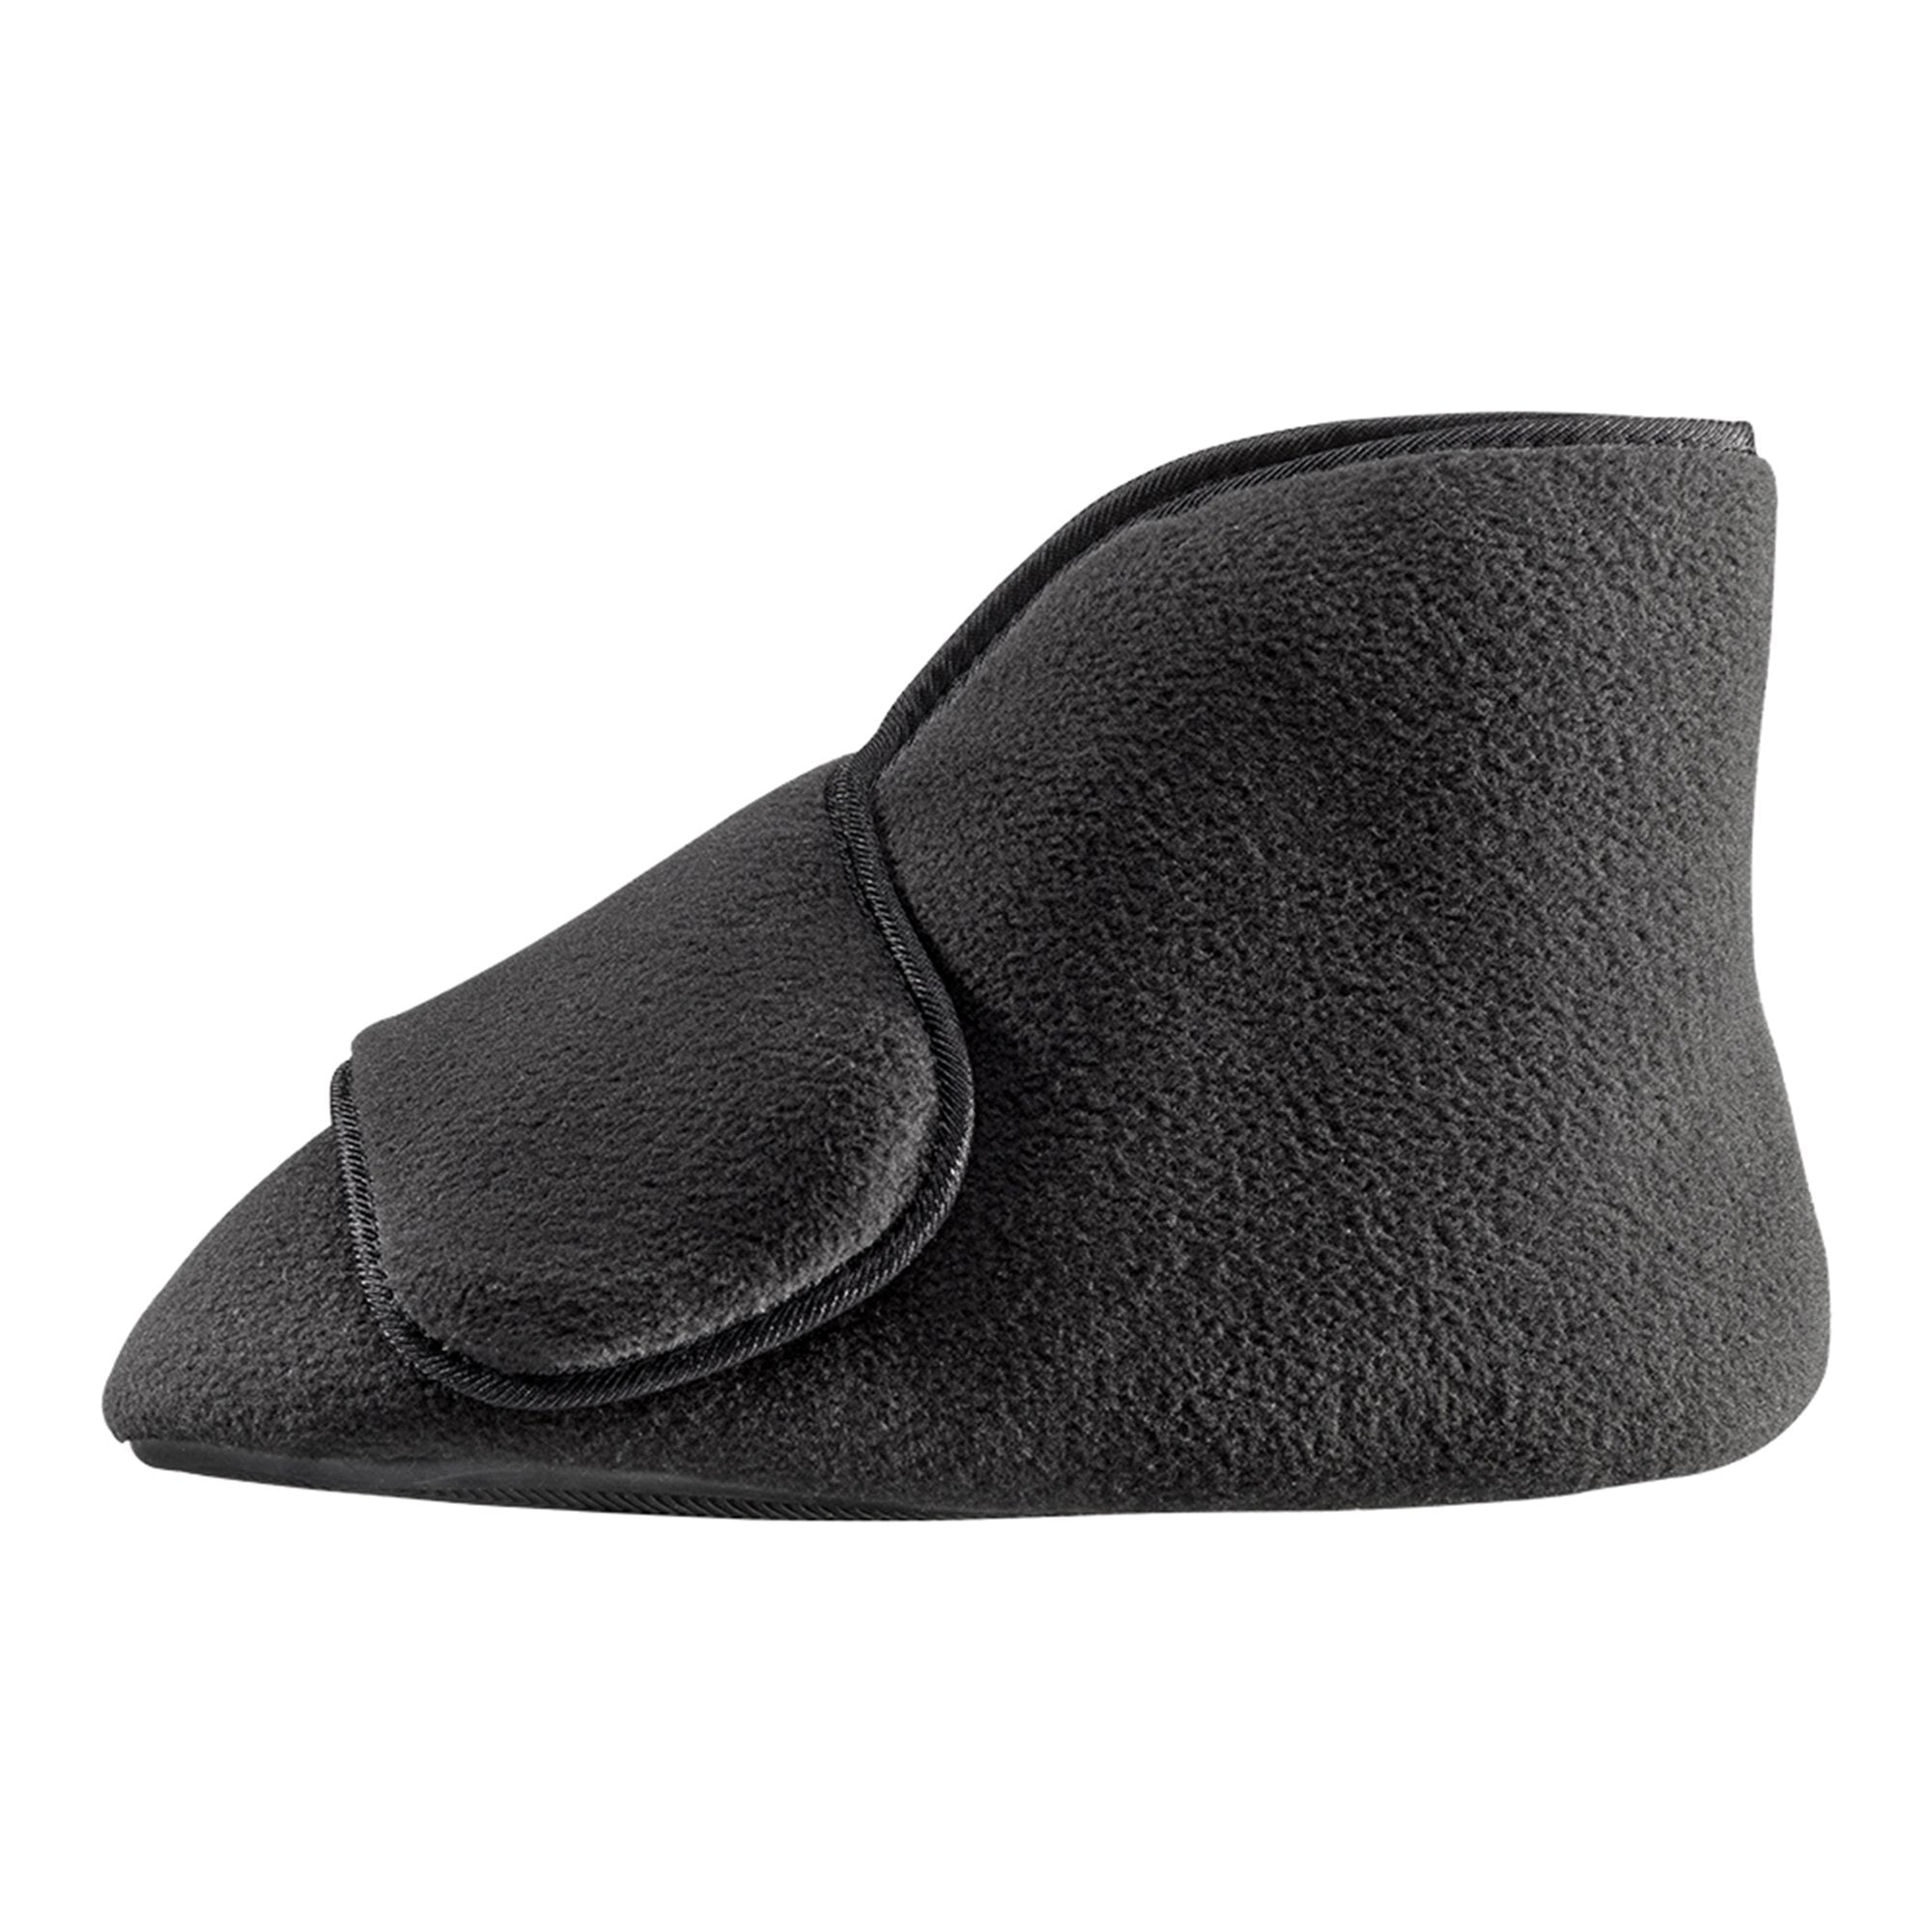 Diabetic Bootie Slippers Silverts® 2X-Large / X-Wide Black Ankle High